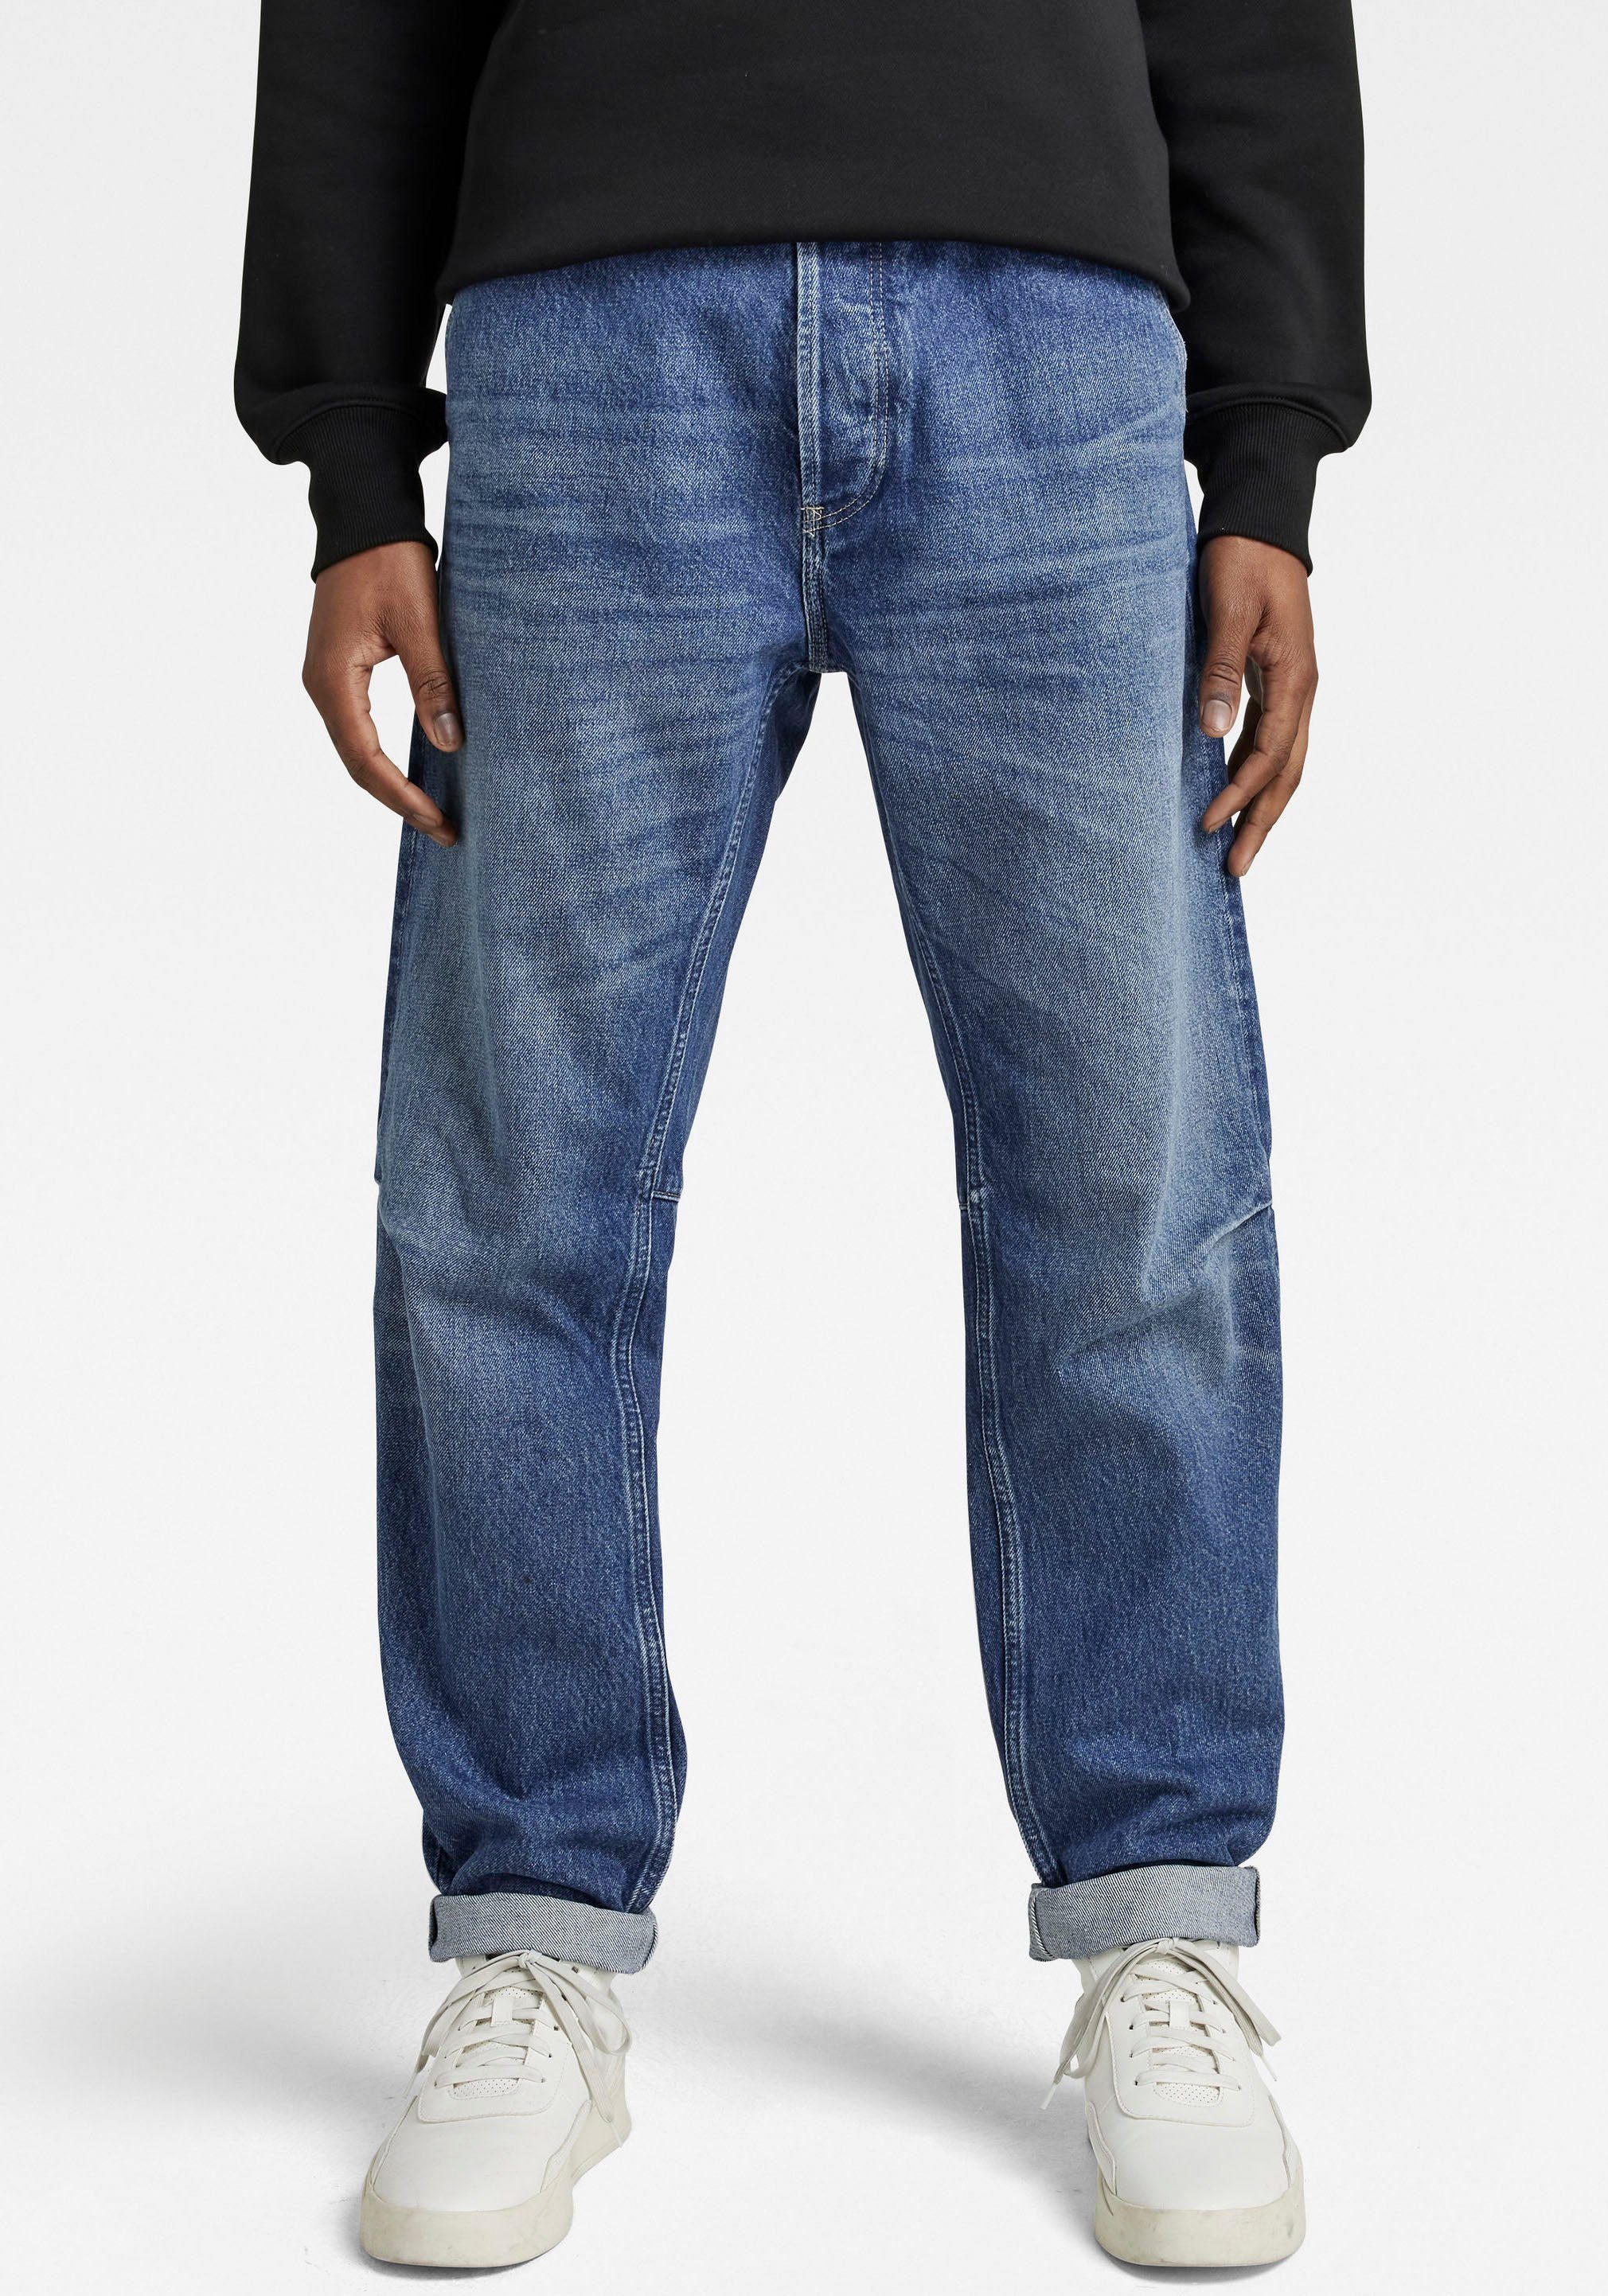 Empfohlener Versandhandel G-Star RAW harbor Grip Tapered-fit-Jeans Relaxed fad 3d Tapered